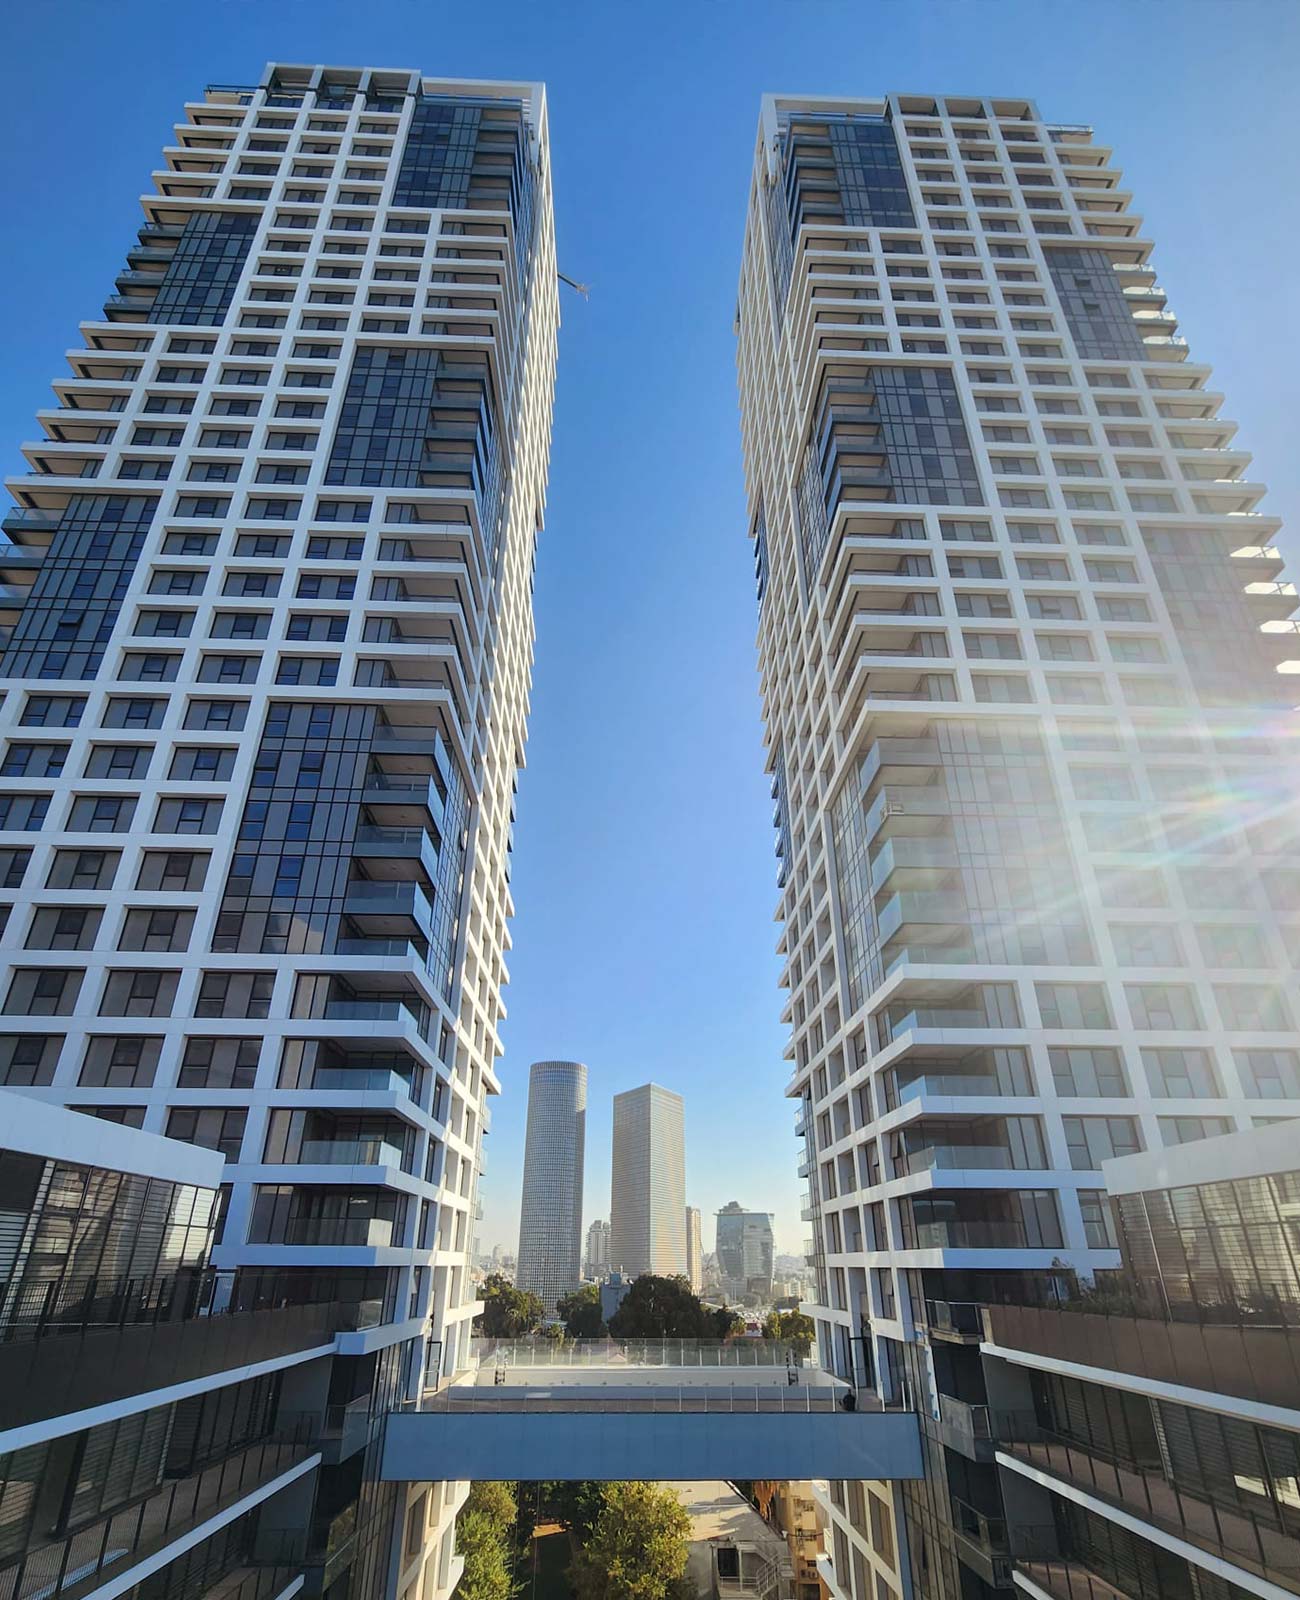 Two residential towers